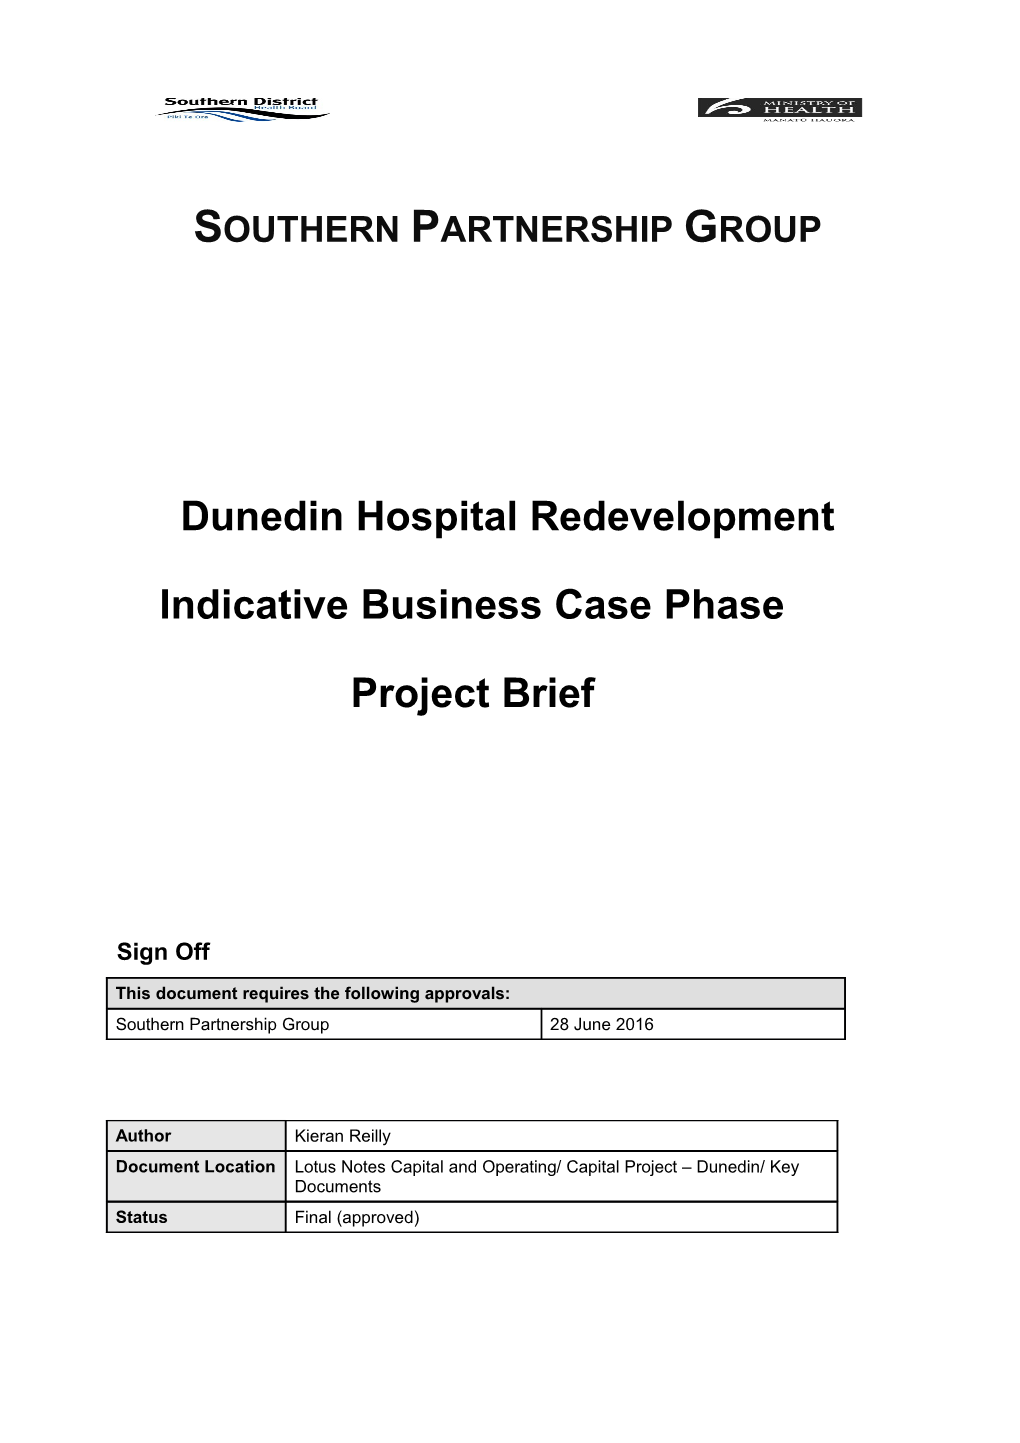 Dunedin Hospital Redevelopment Indicative Business Case Phase Project Brief